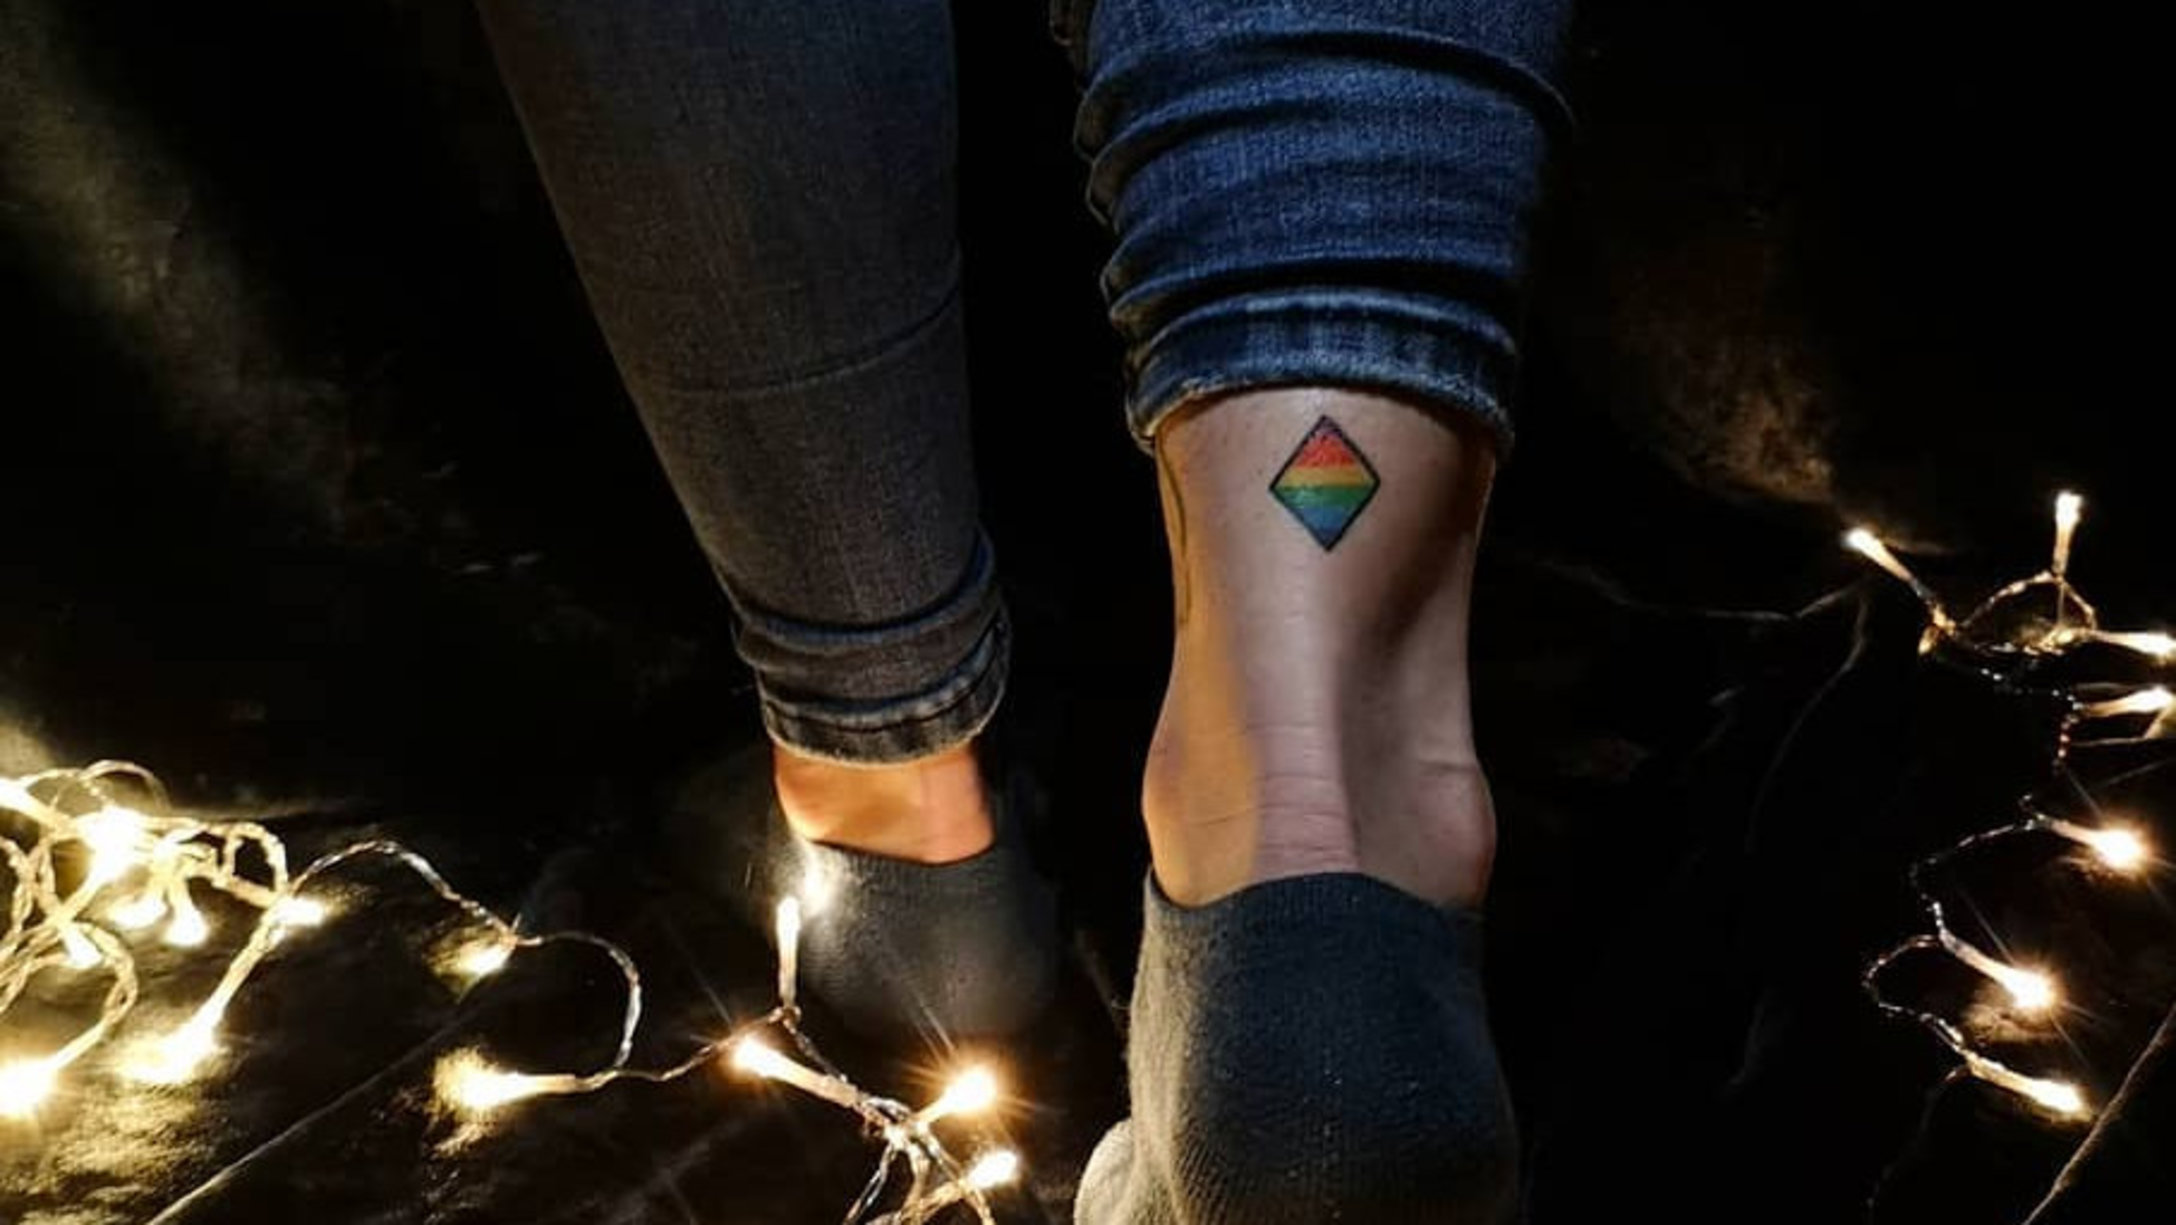 20 Proud Tattoos for Parents To Stand With Their LGBTQ Kids